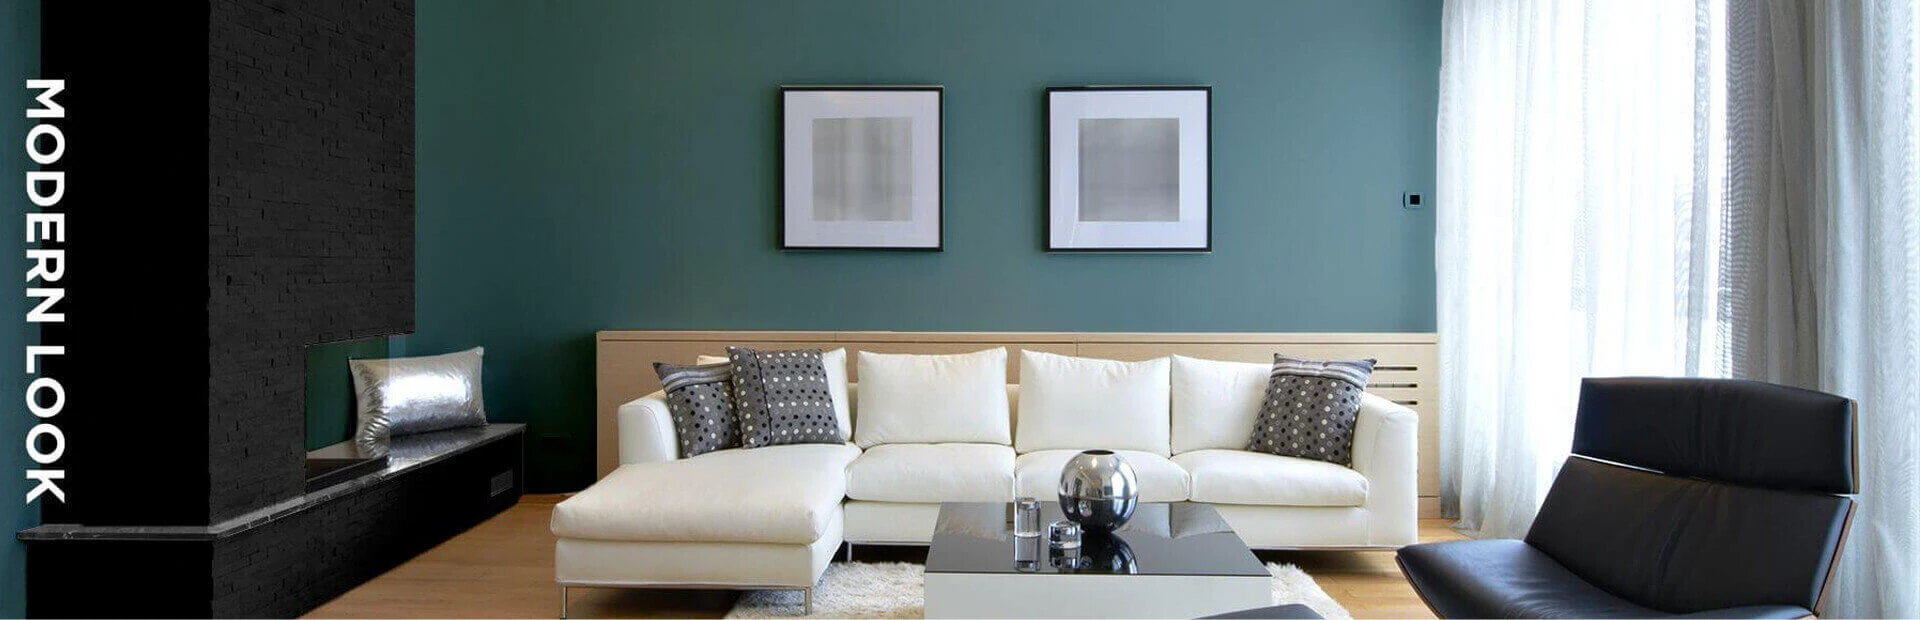 Living room with black, cream and green colour scheme.